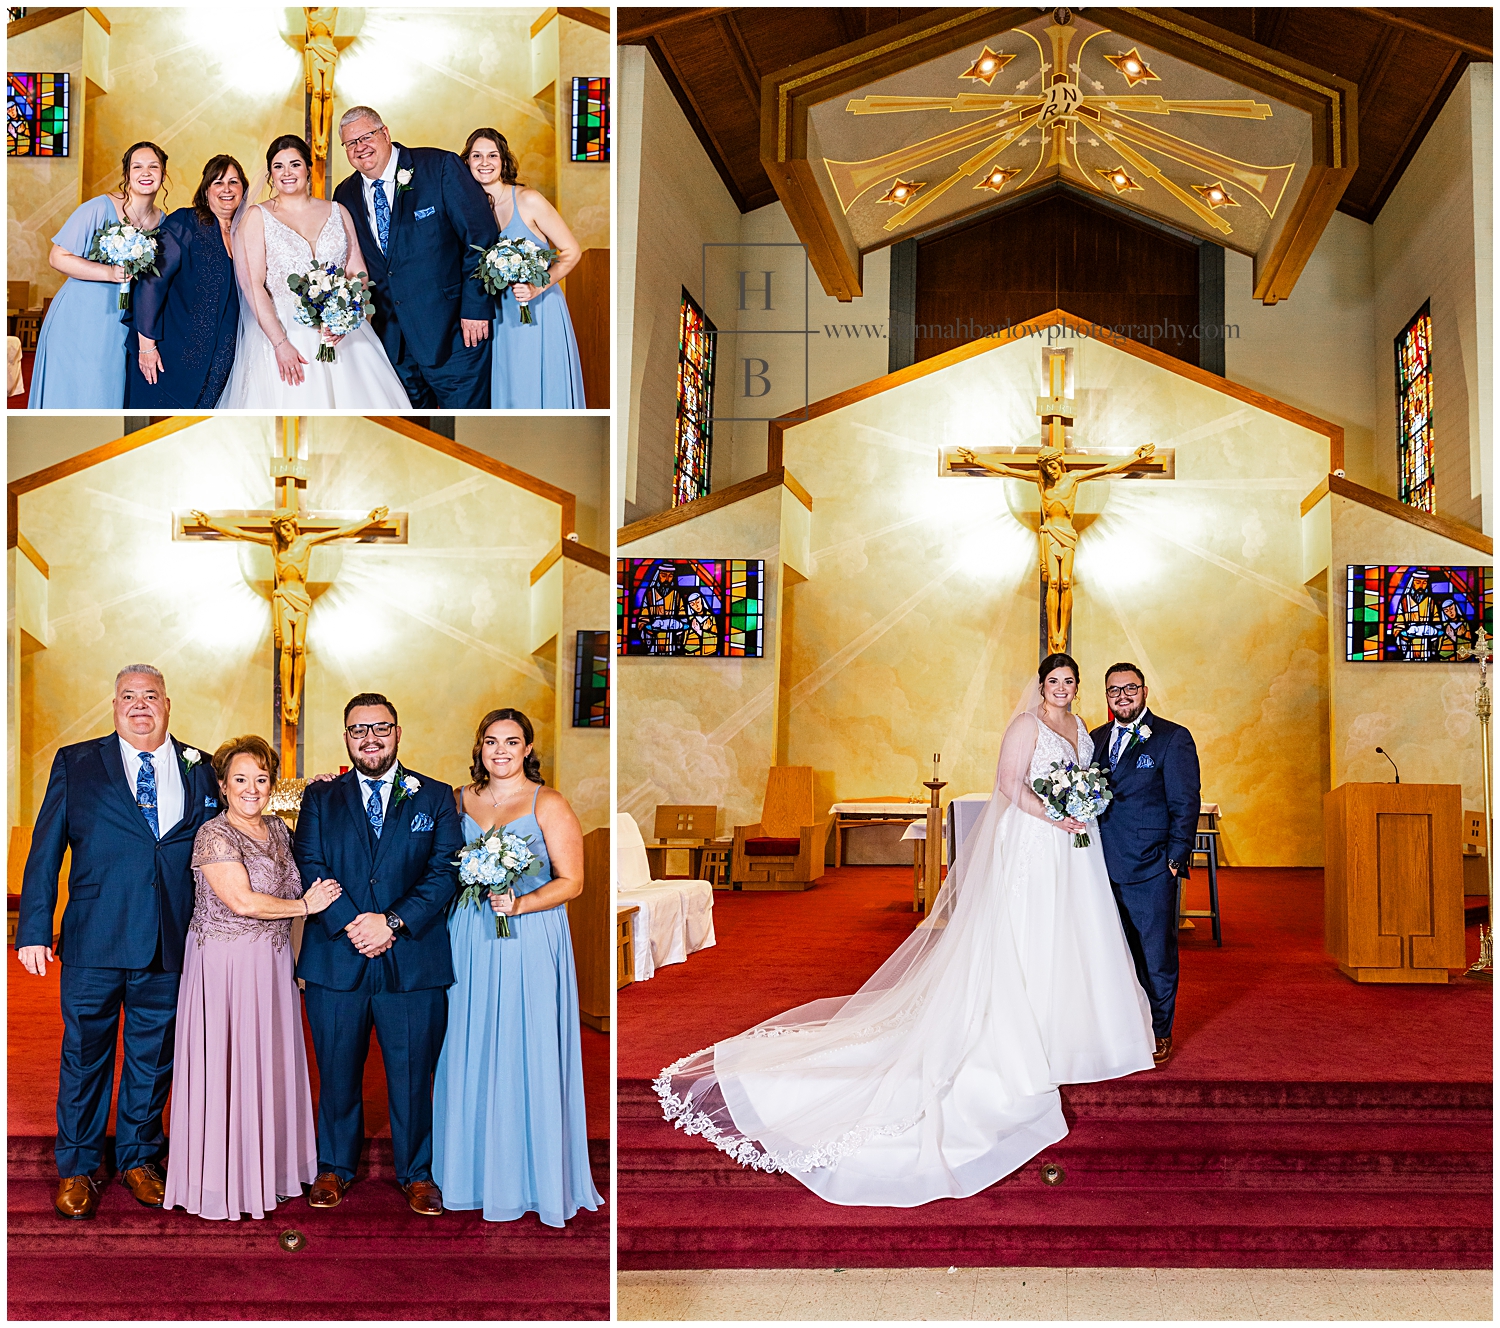 Family formal photos of couple at front alter of church